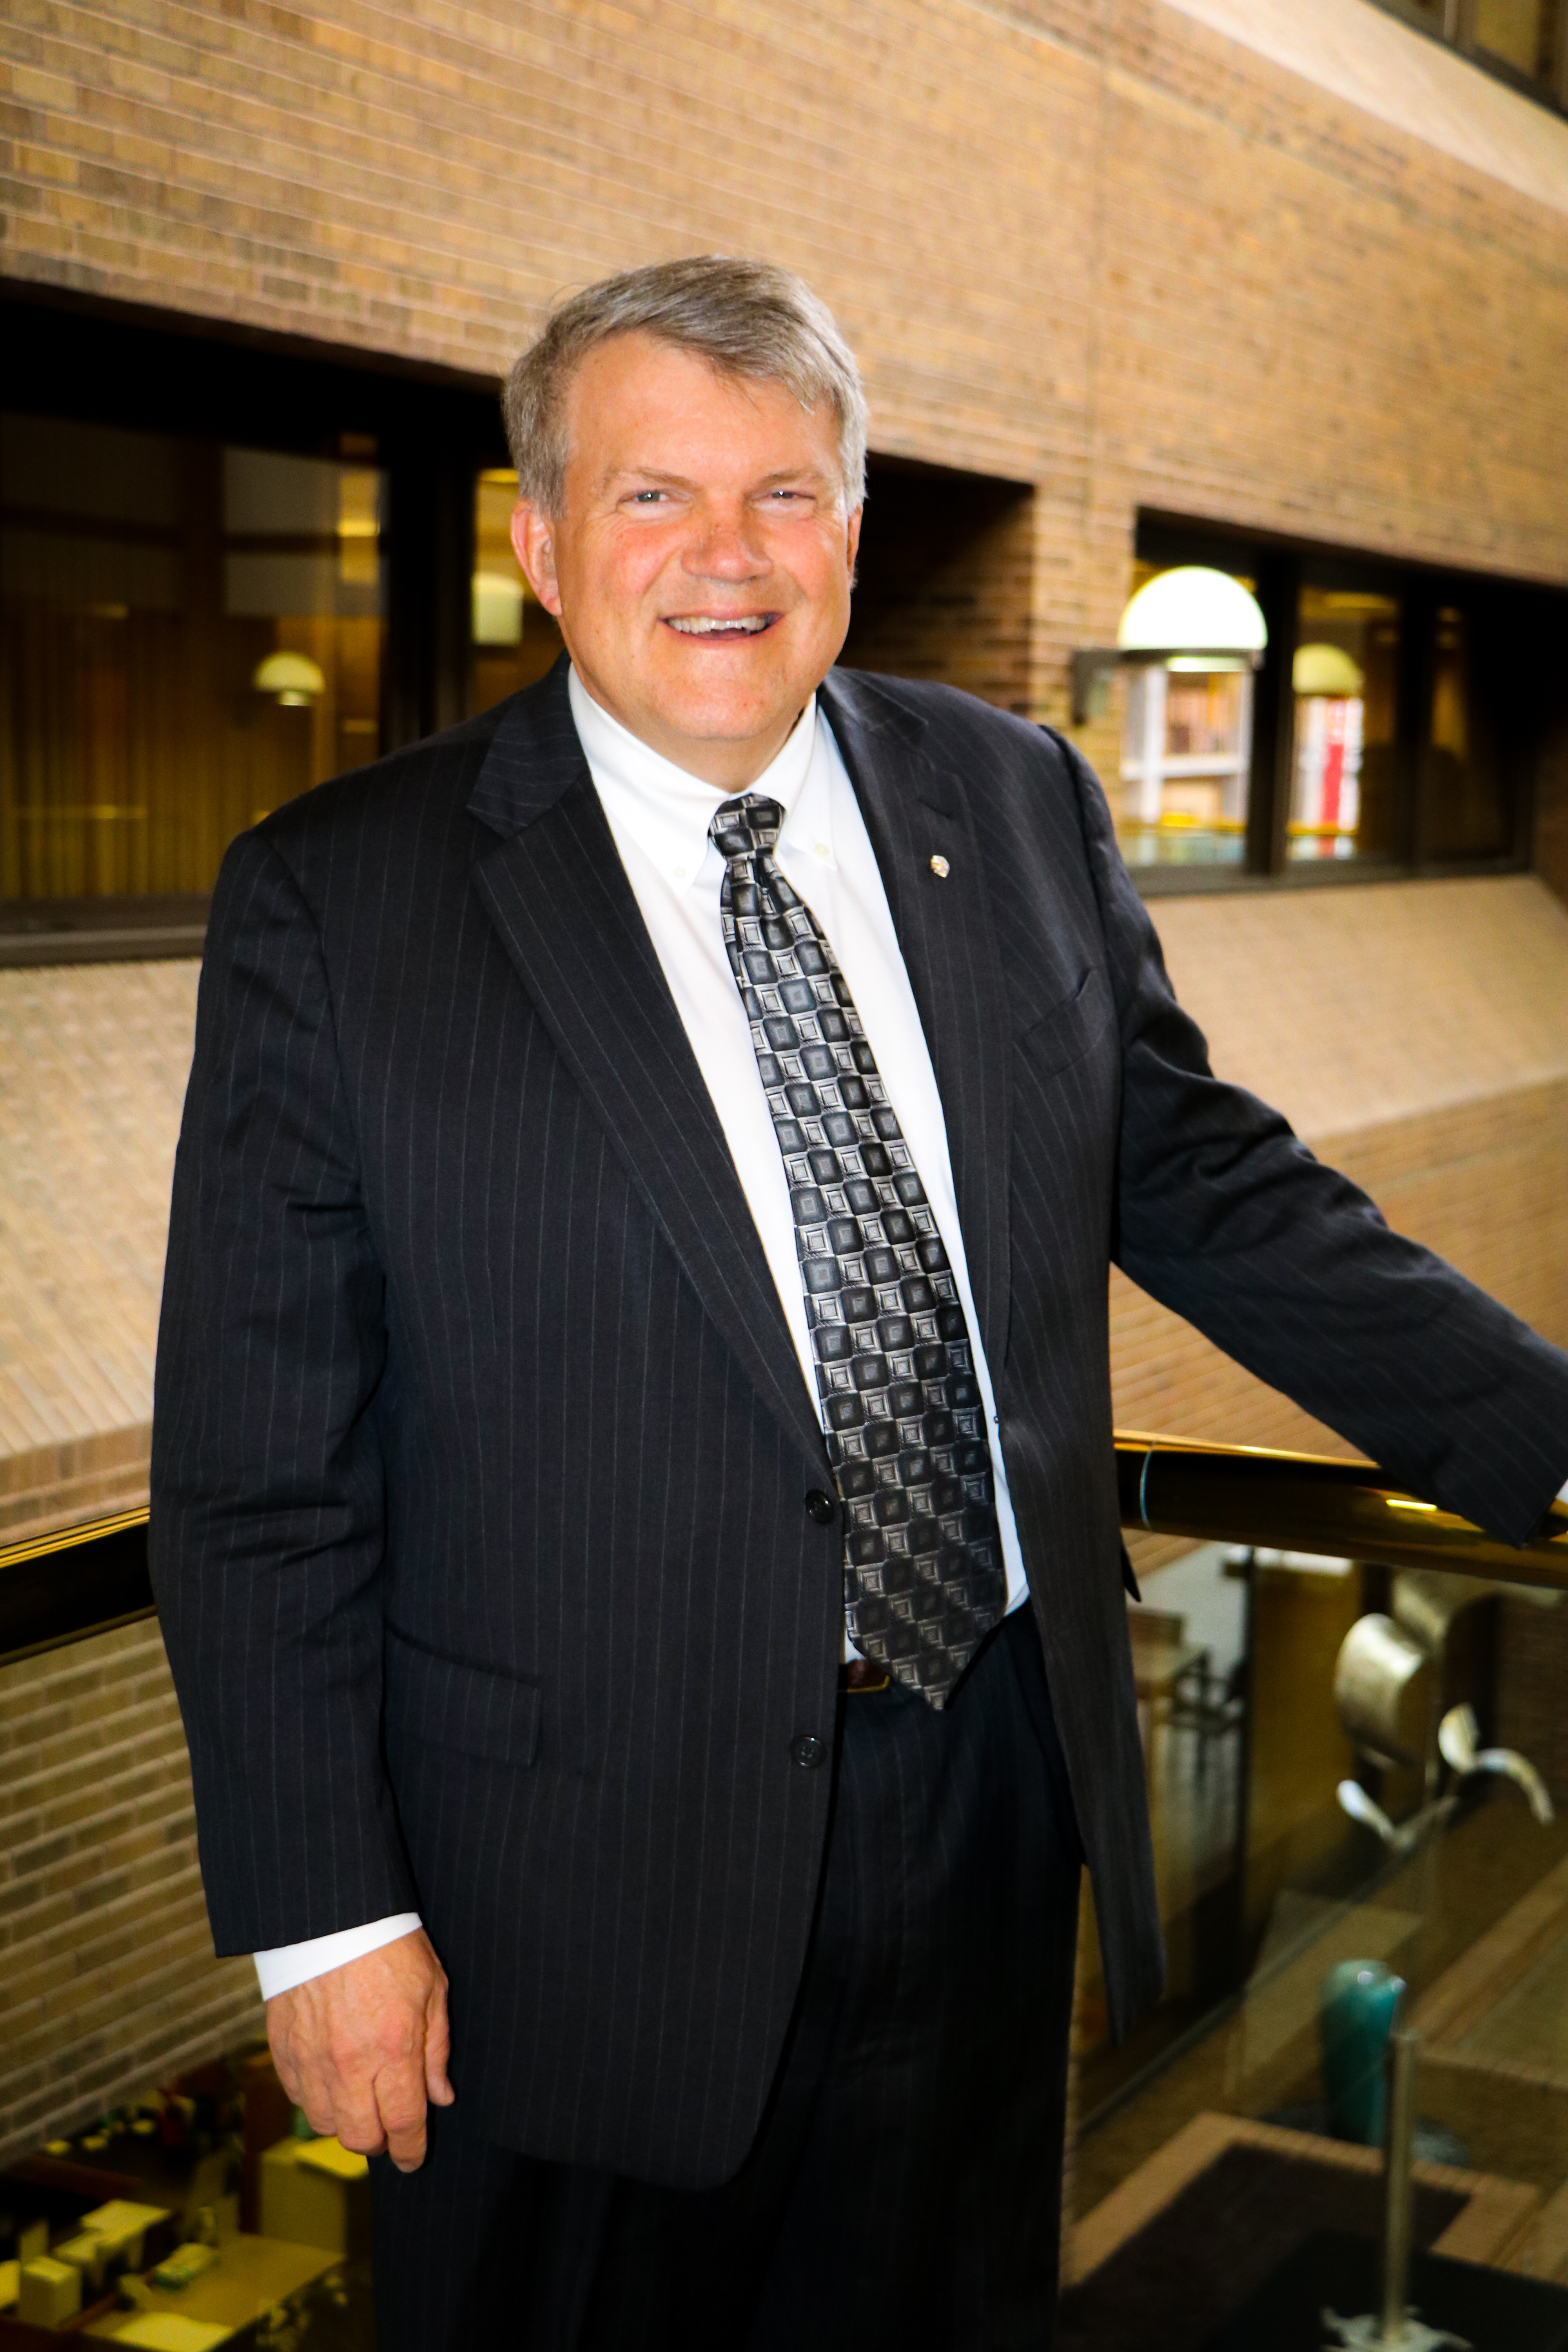 Bill Baker, Chairman of the Board at The First National Bank in Sioux Falls